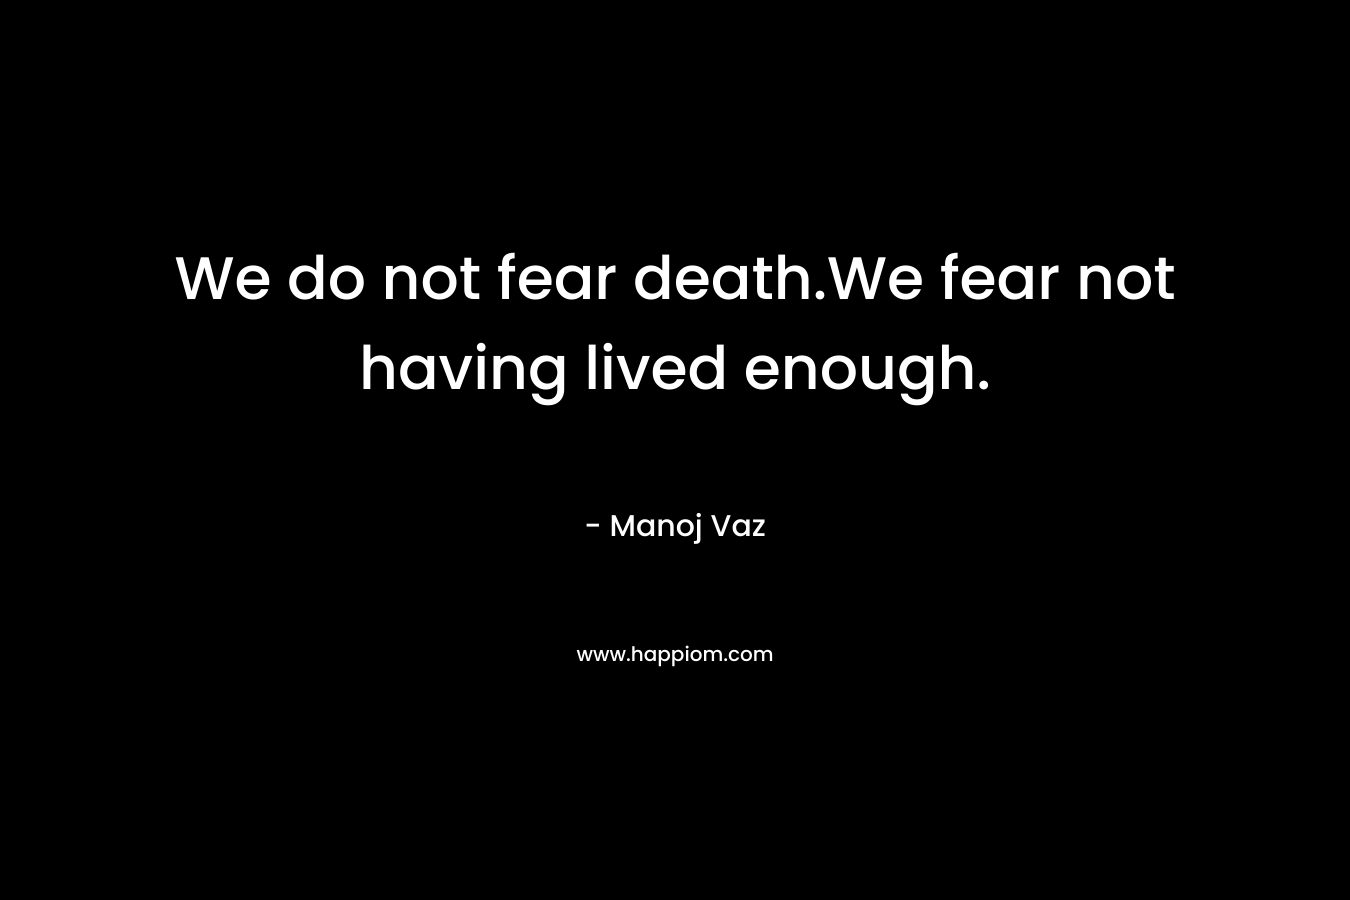 We do not fear death.We fear not having lived enough.